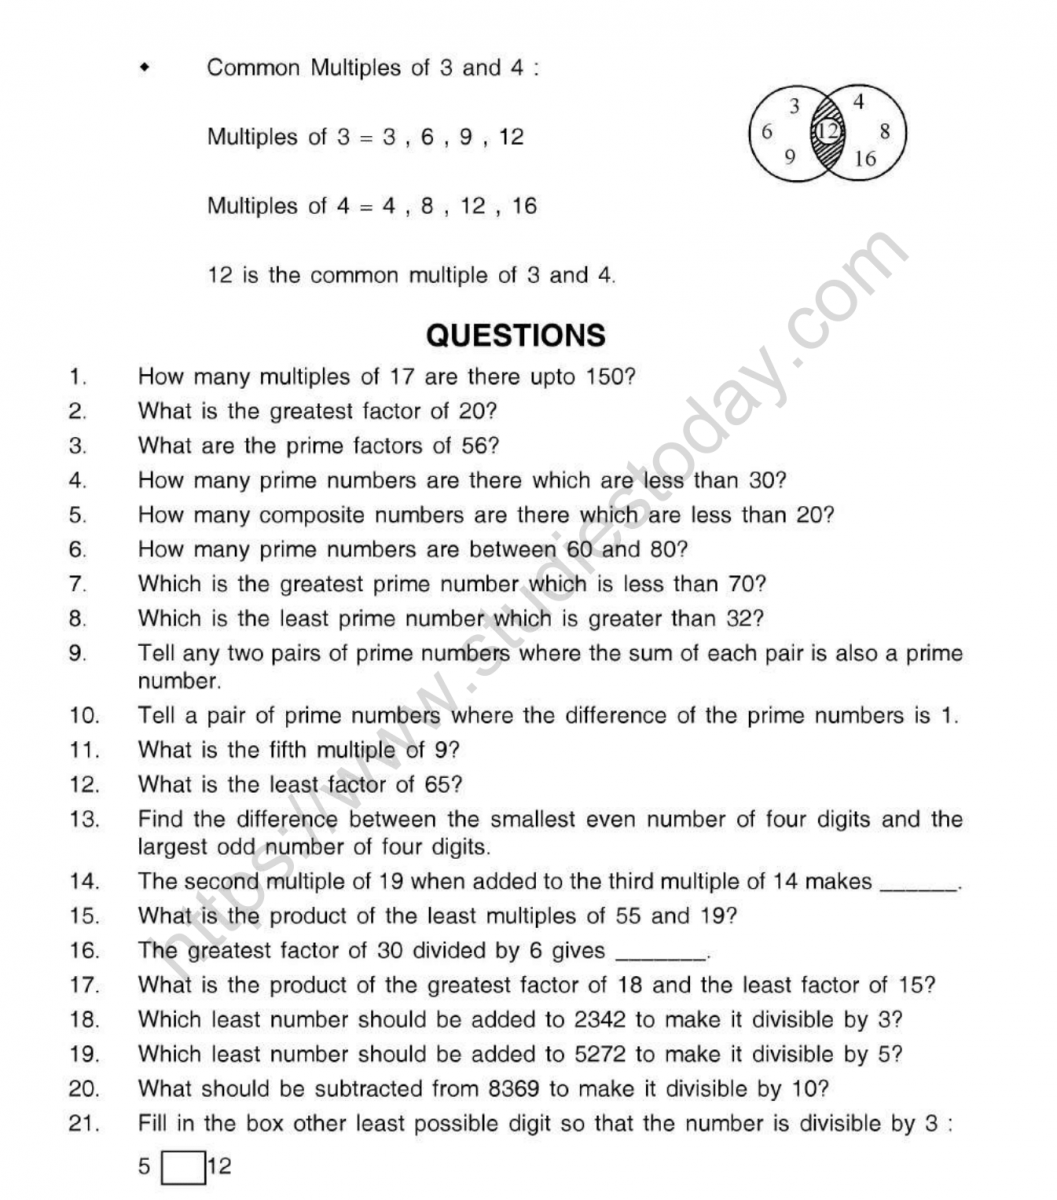 factors-and-multiples-worksheet-for-class-5-cbse-roger-brent-s-5th-grade-math-worksheets